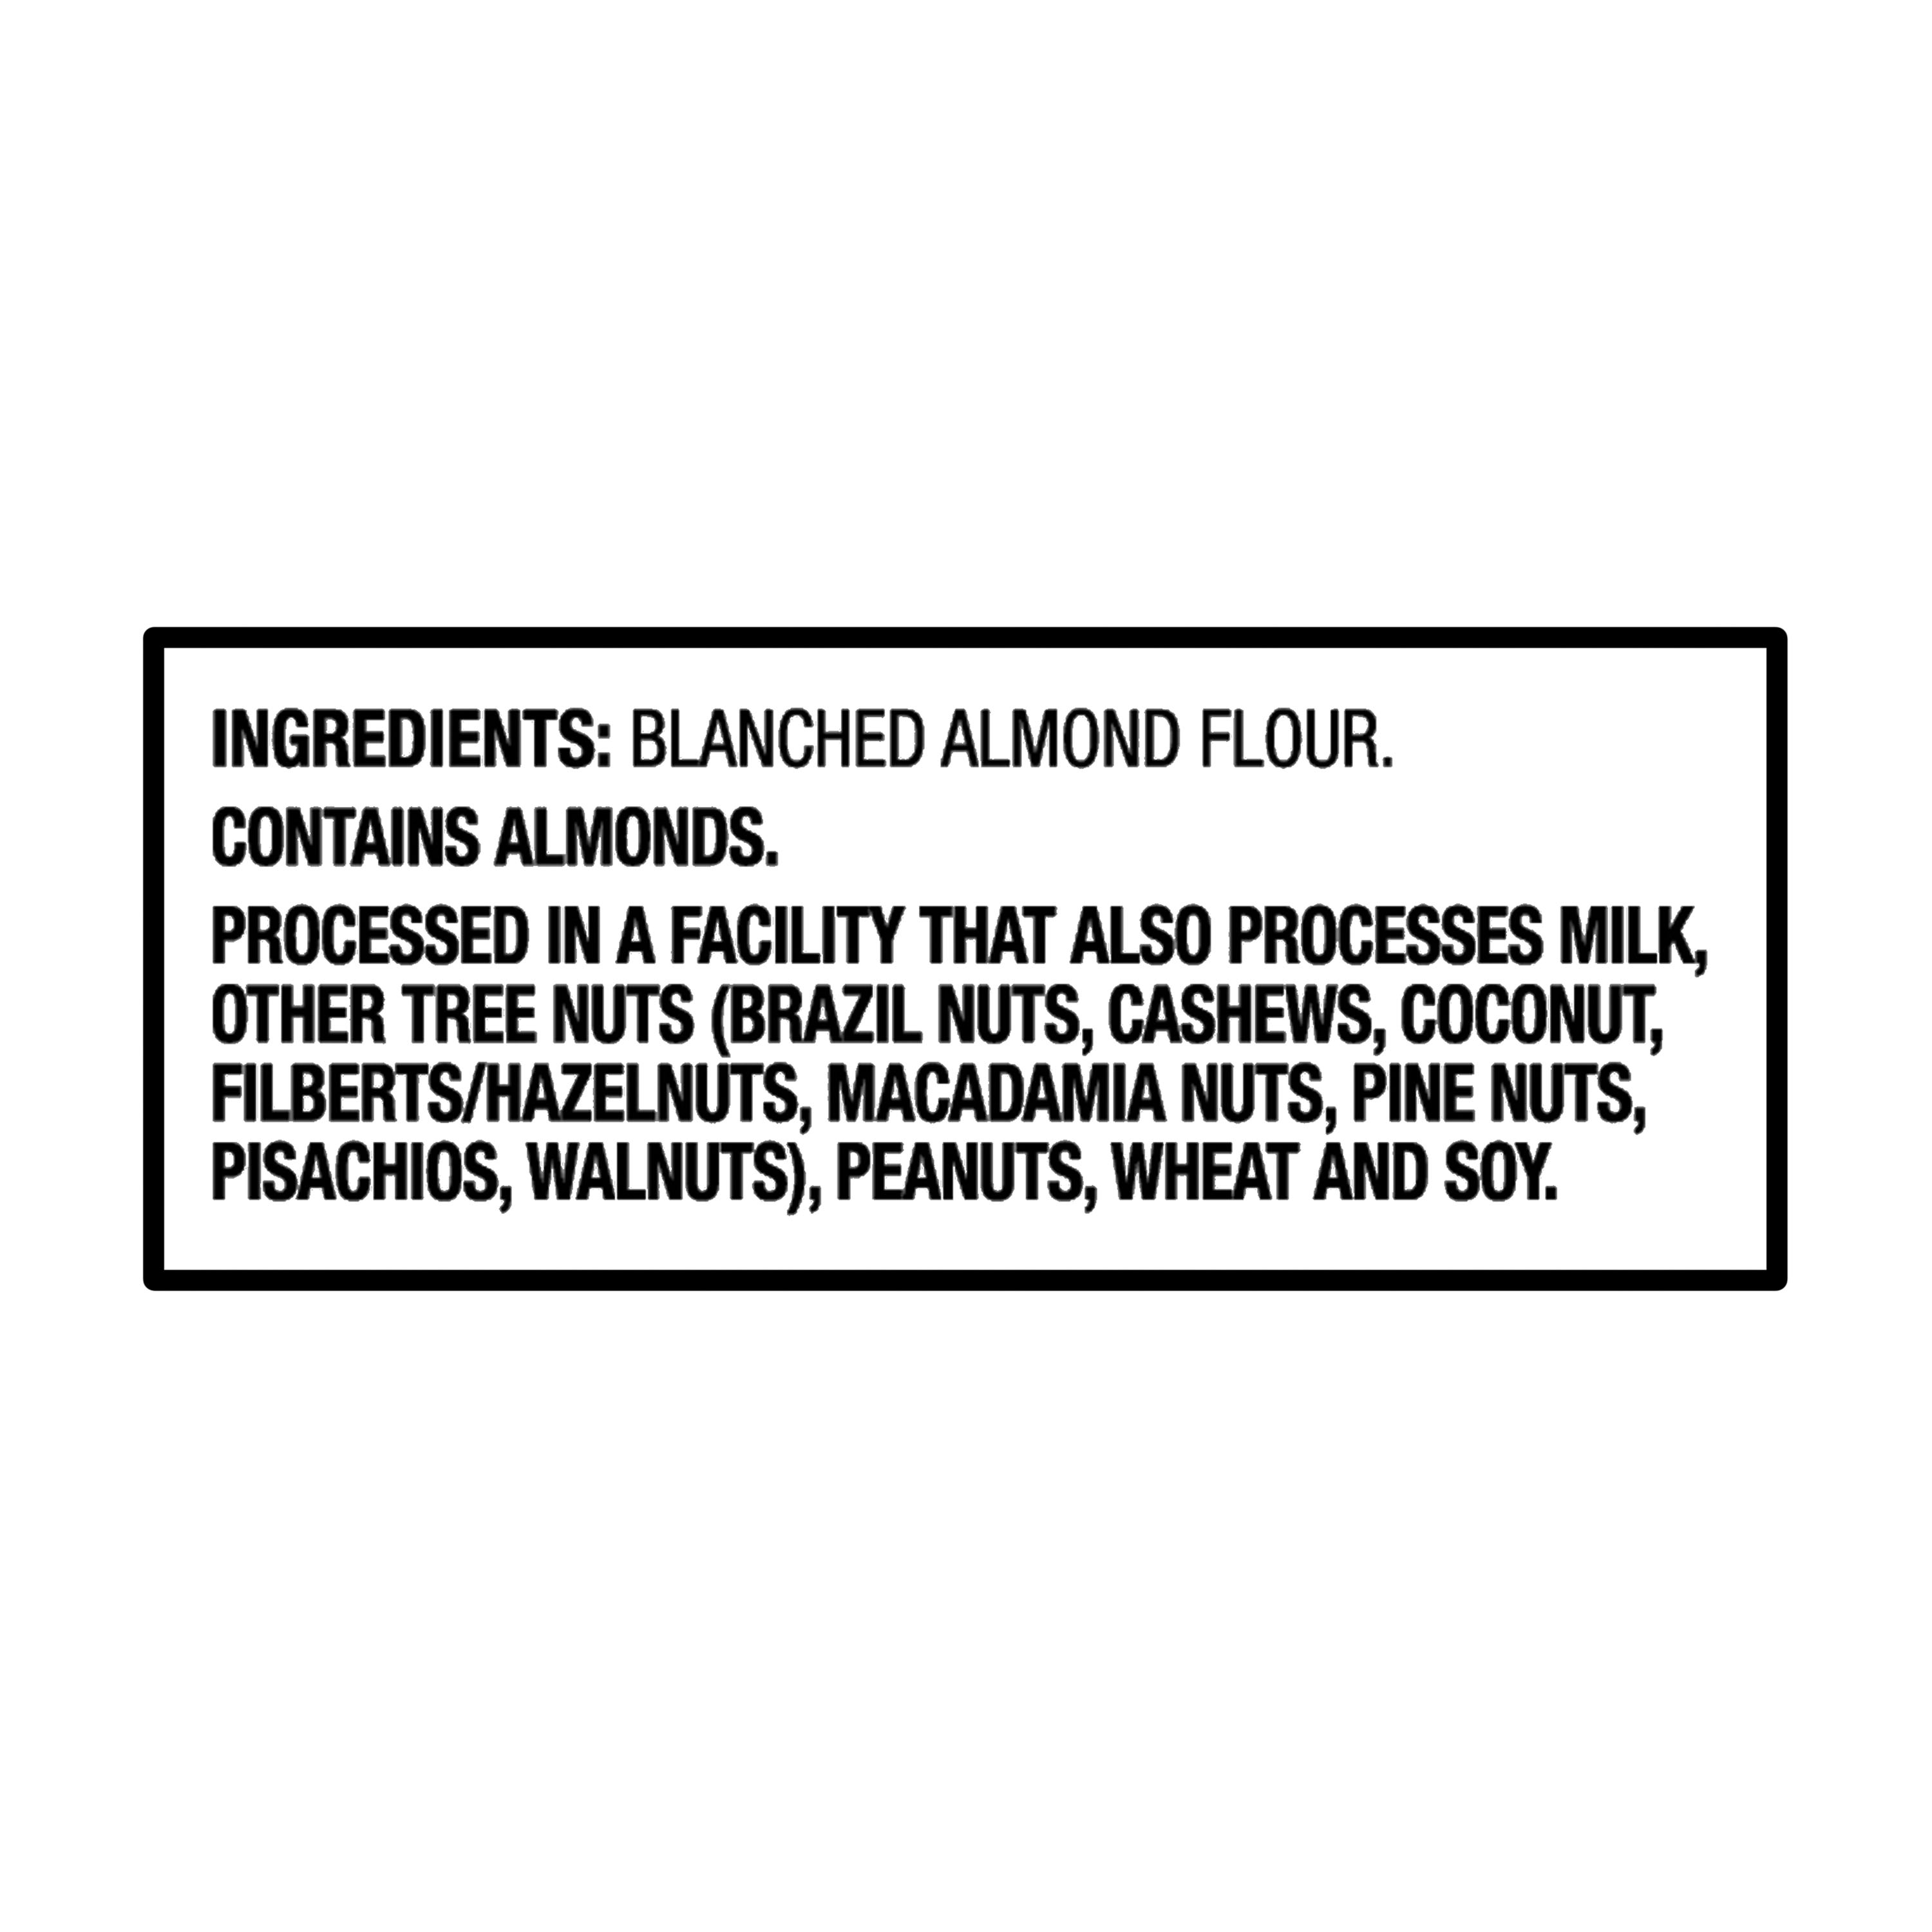 Great Value Superfine Blanched Almond Flour, 2 lb - image 4 of 7